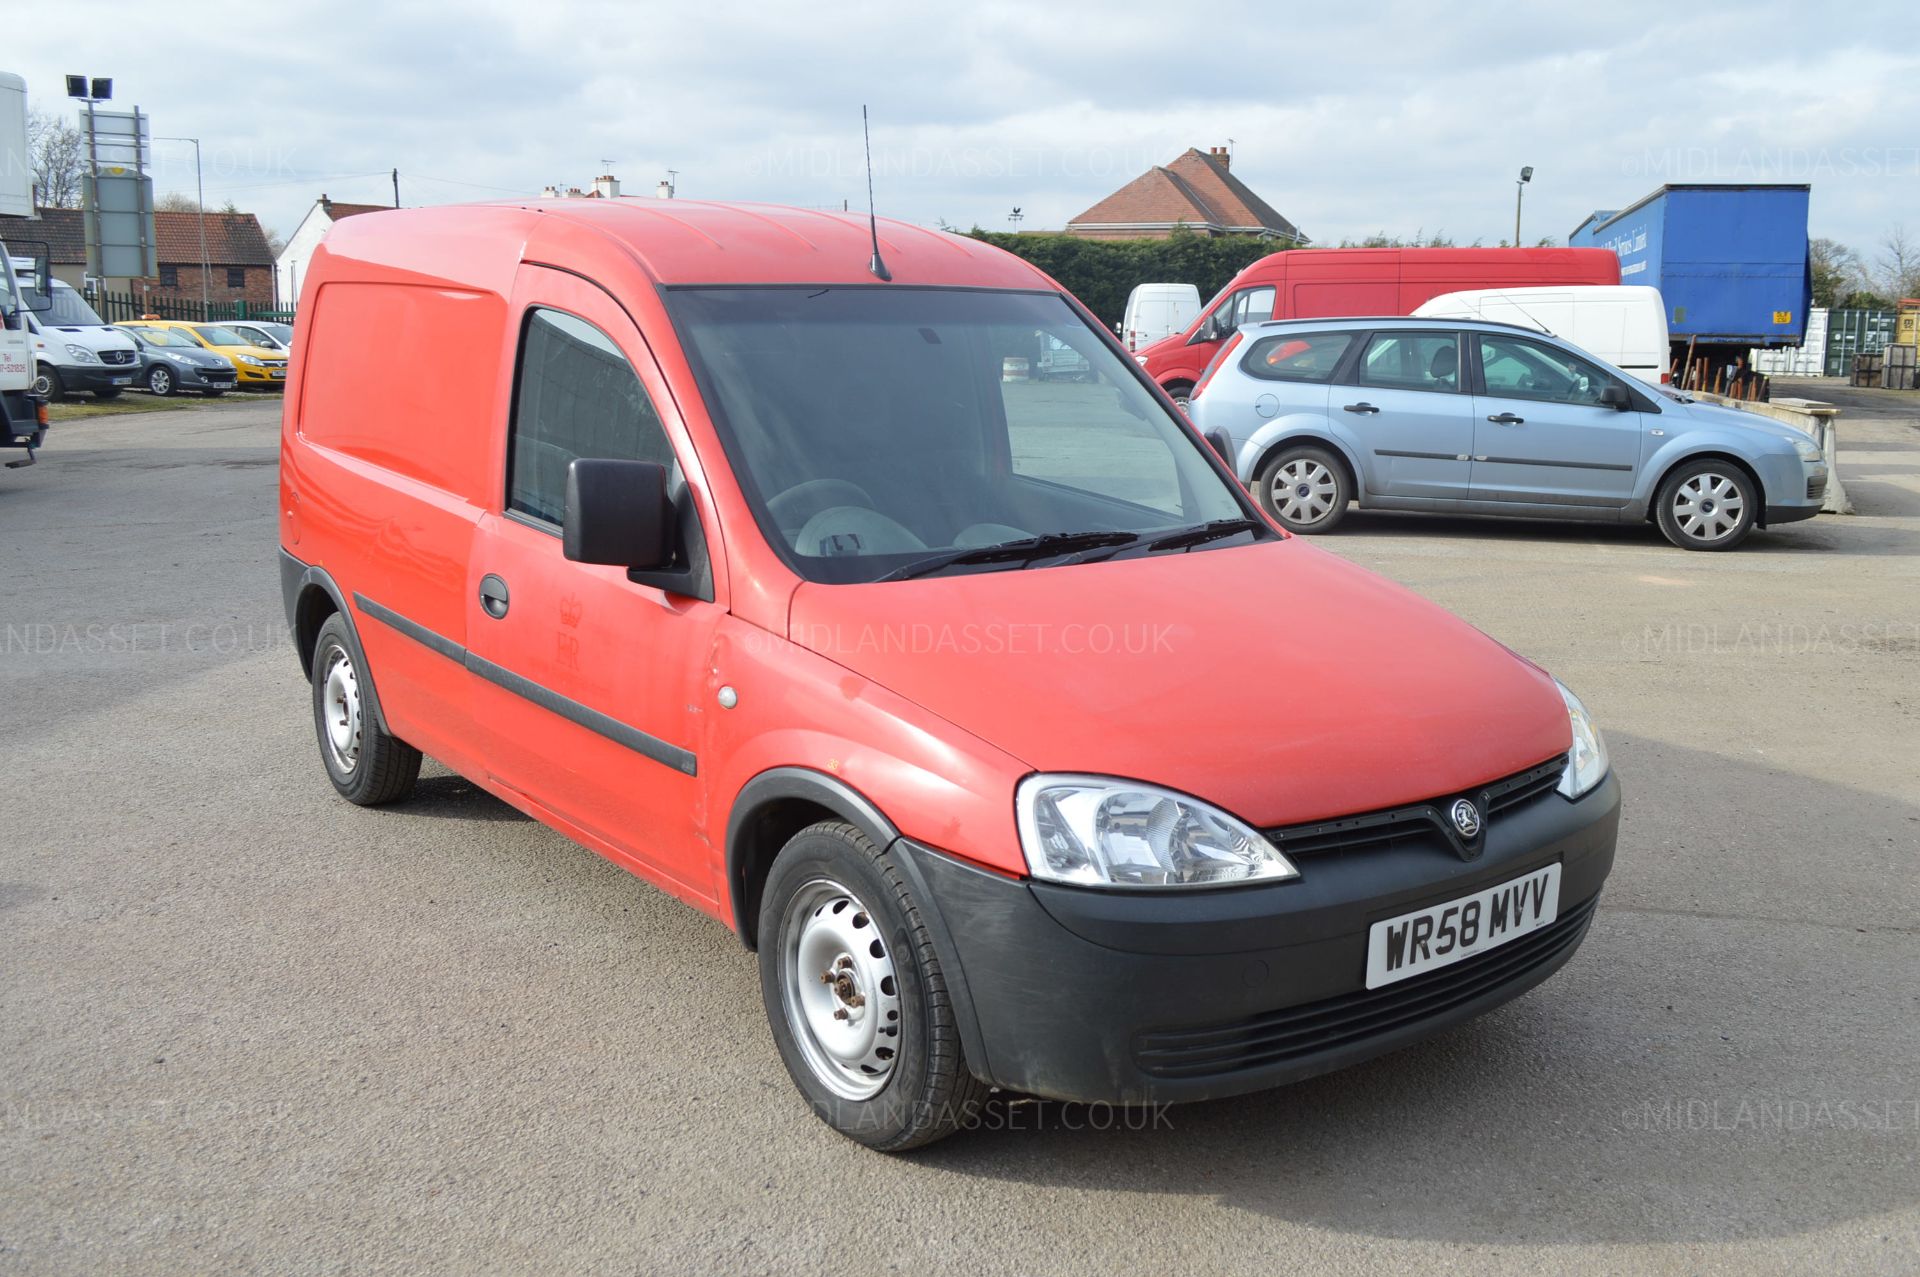 KB - 2008/58 REG VAUXHALL COMBO 1700 CDTI - 1 PREVIOUS OWNER, ROYAL MAIL *NO VAT*   DATE OF